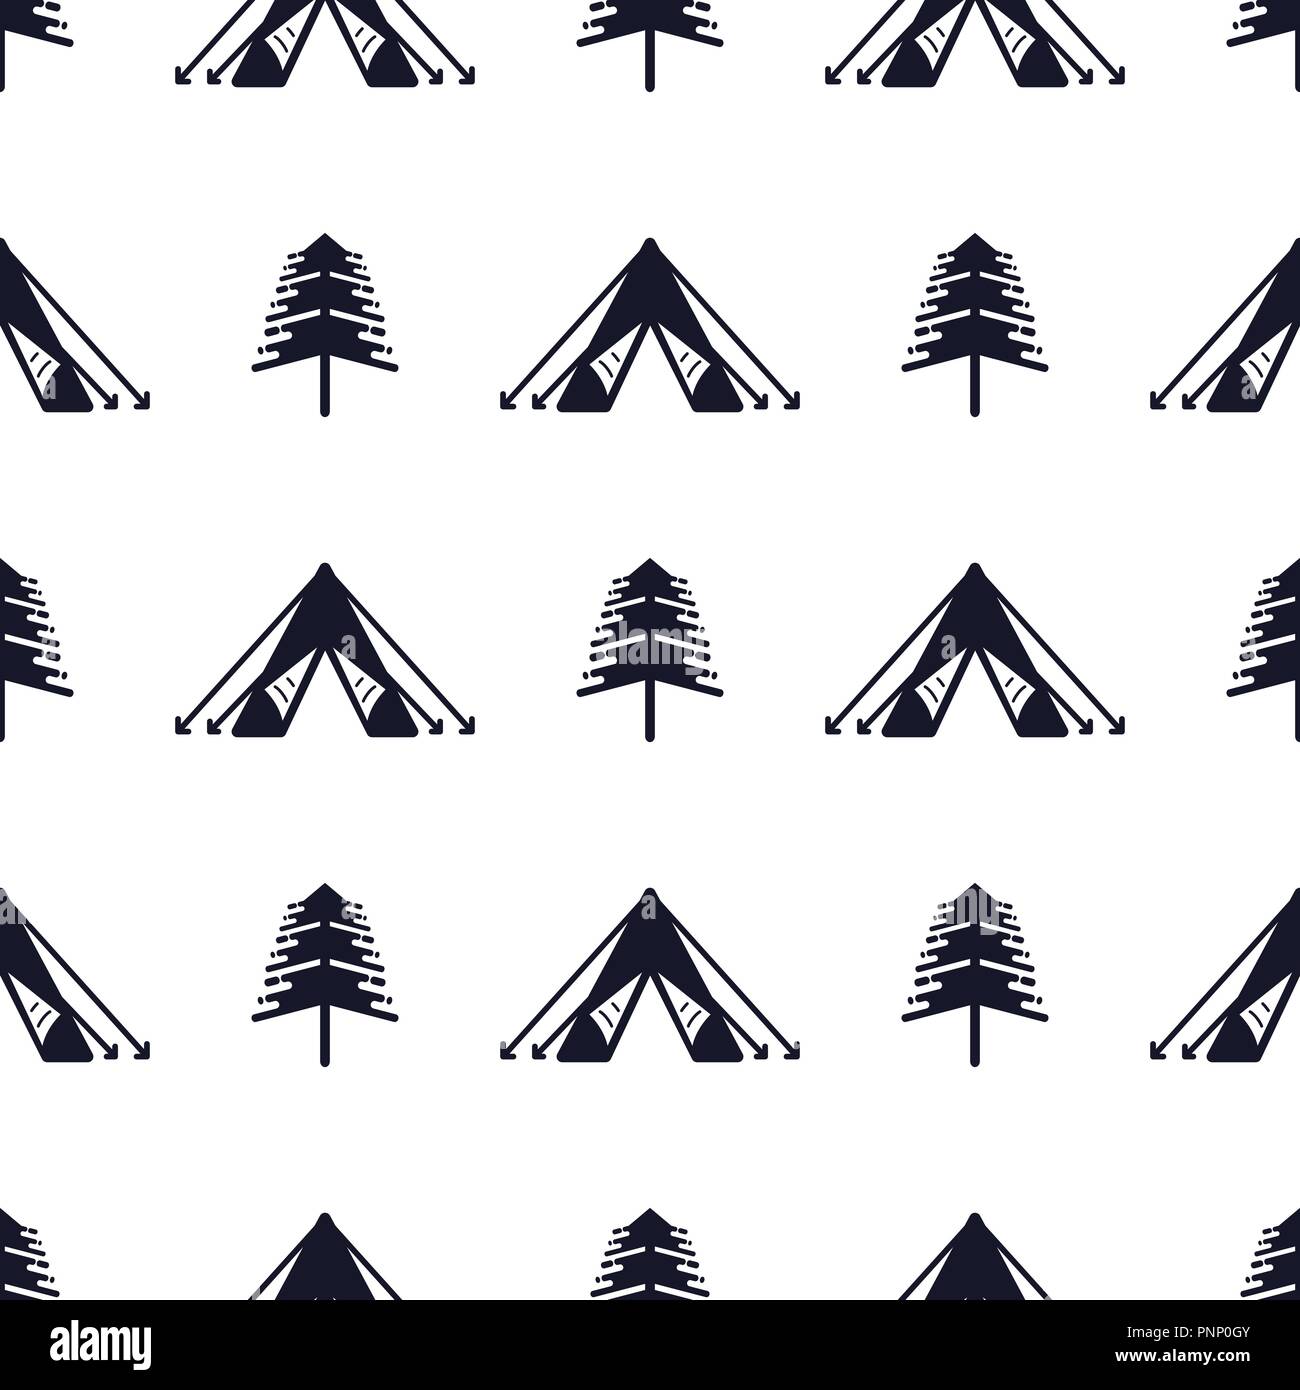 Tent and tree seamless pattern. Silhouette distressed style. Outdoor adventure equipment wallpaper background. Stock vector illustration isolated on white Stock Vector